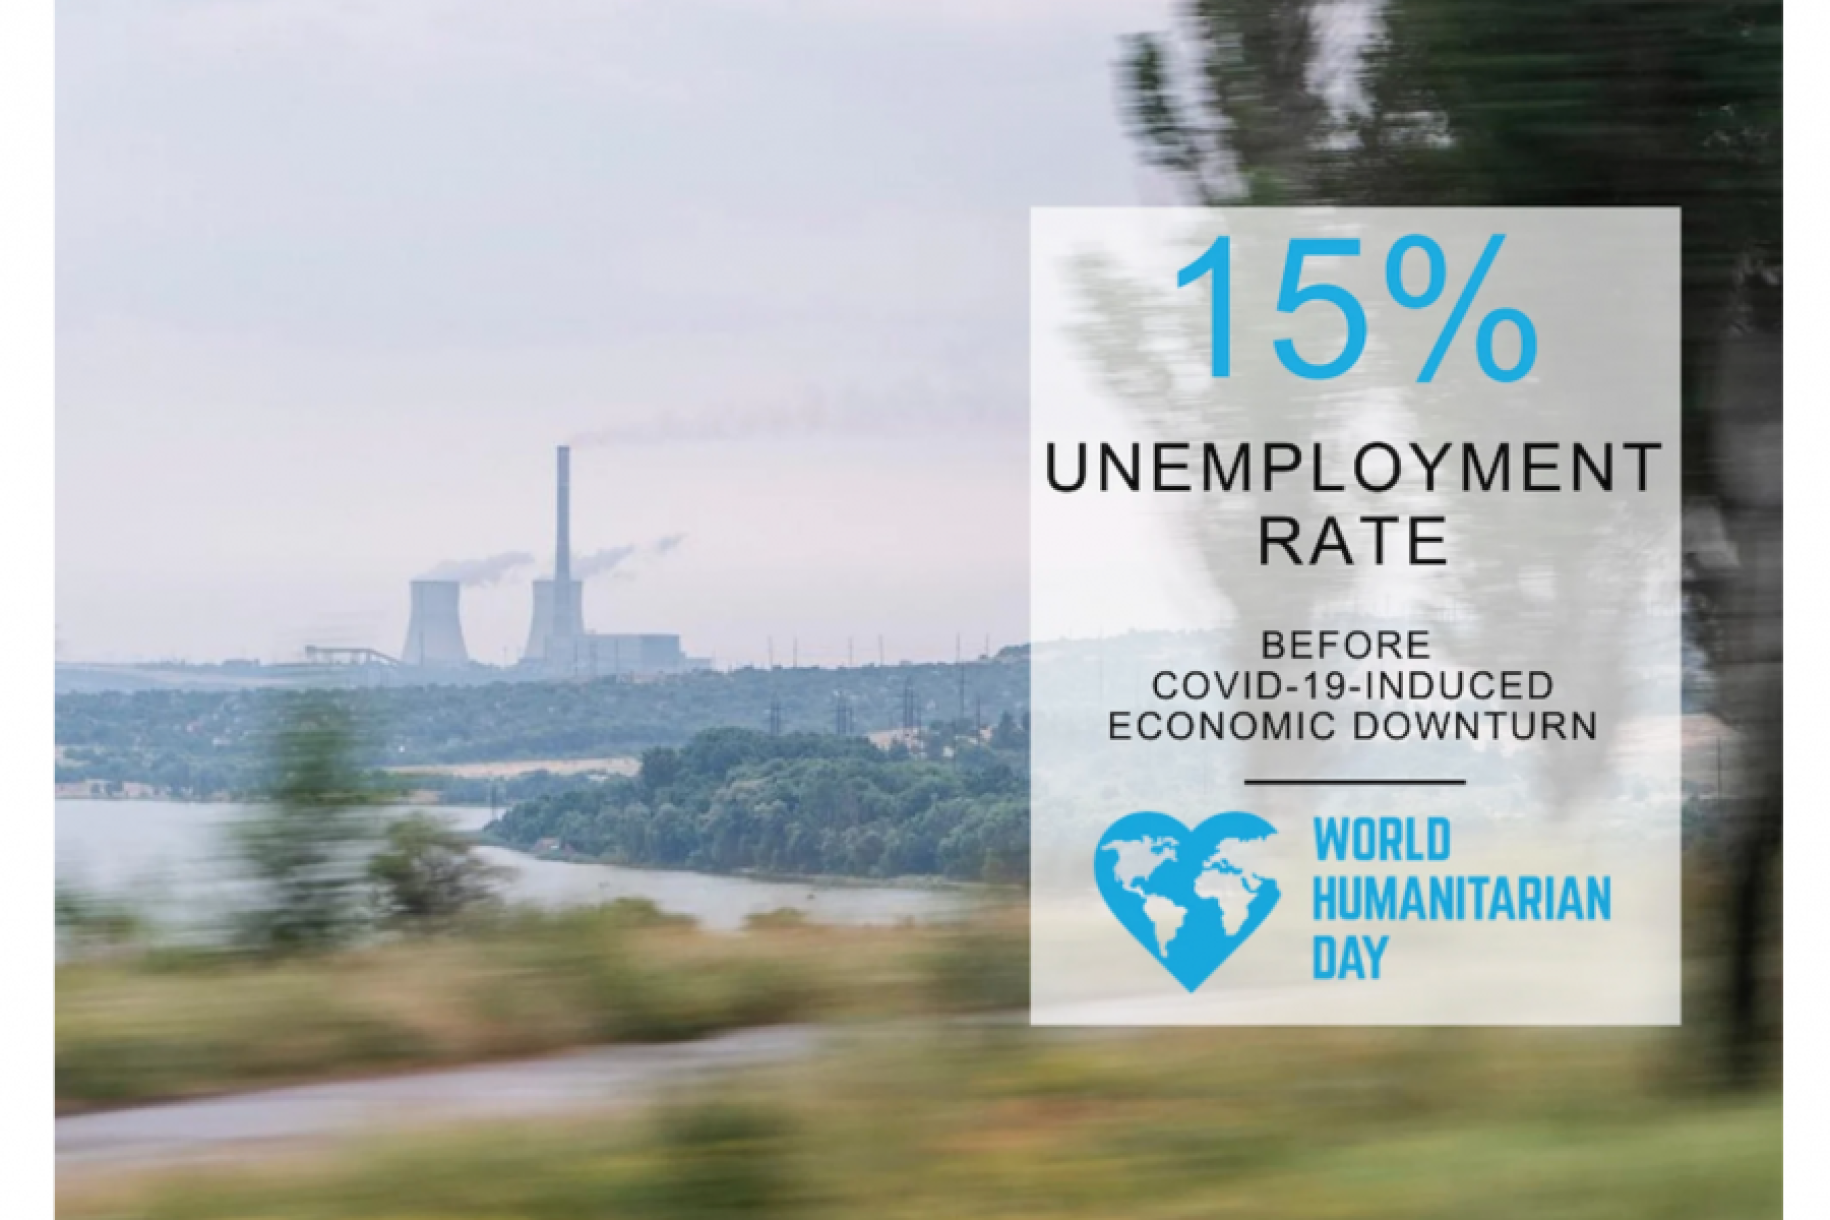 Scenic image from a moving vehicle that shows what looks to be a factory in the background. A factoid on the right reads: 15% unemployment rate before COVID-19 induced economic downturn.